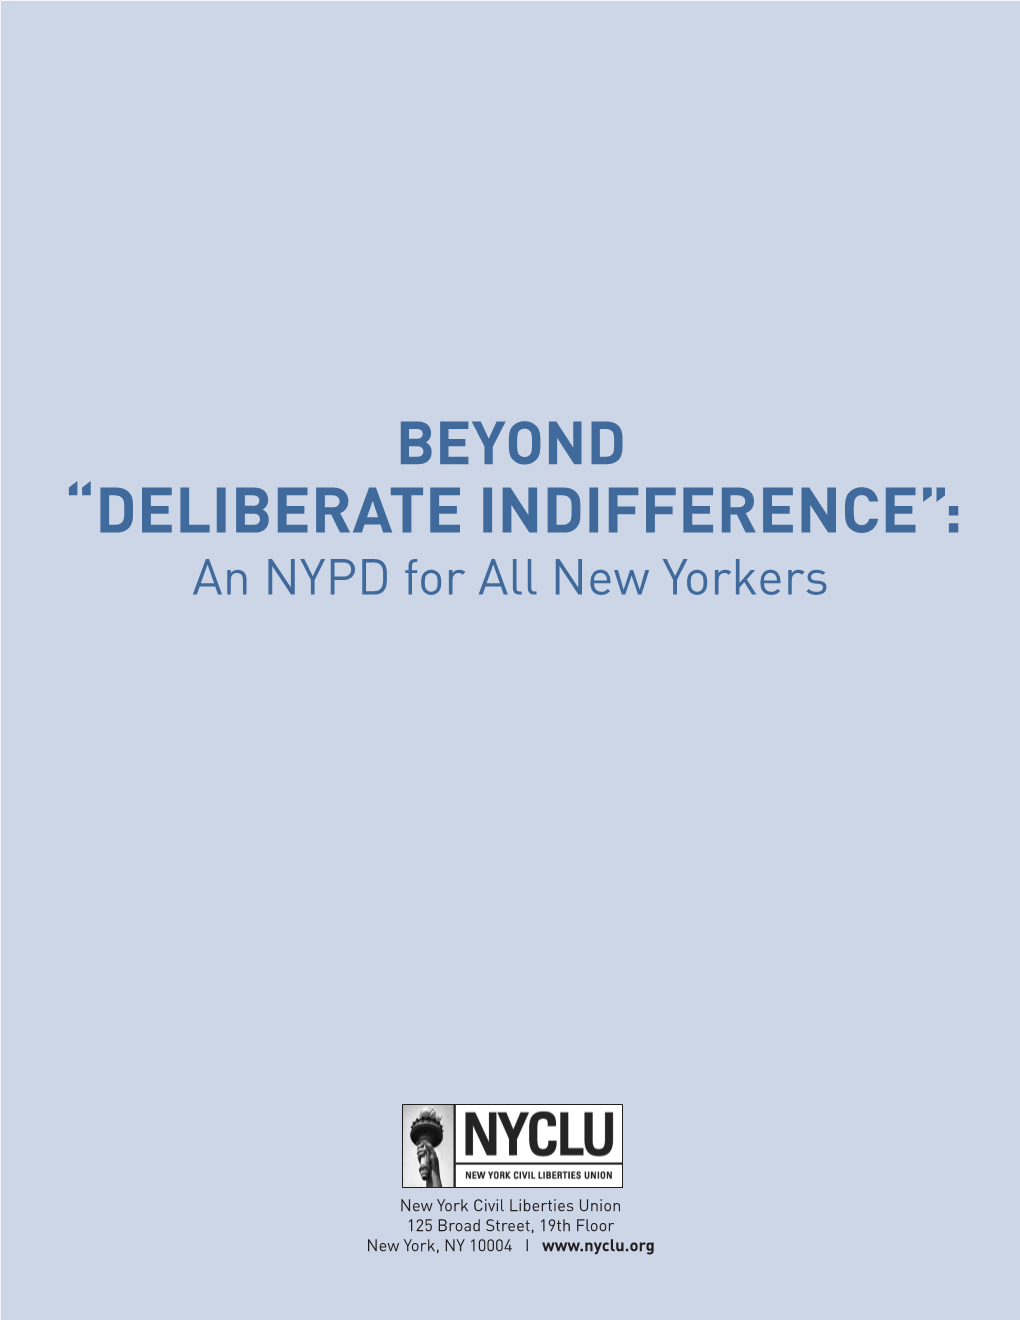 “DELIBERATE INDIFFERENCE”: an NYPD for All New Yorkers